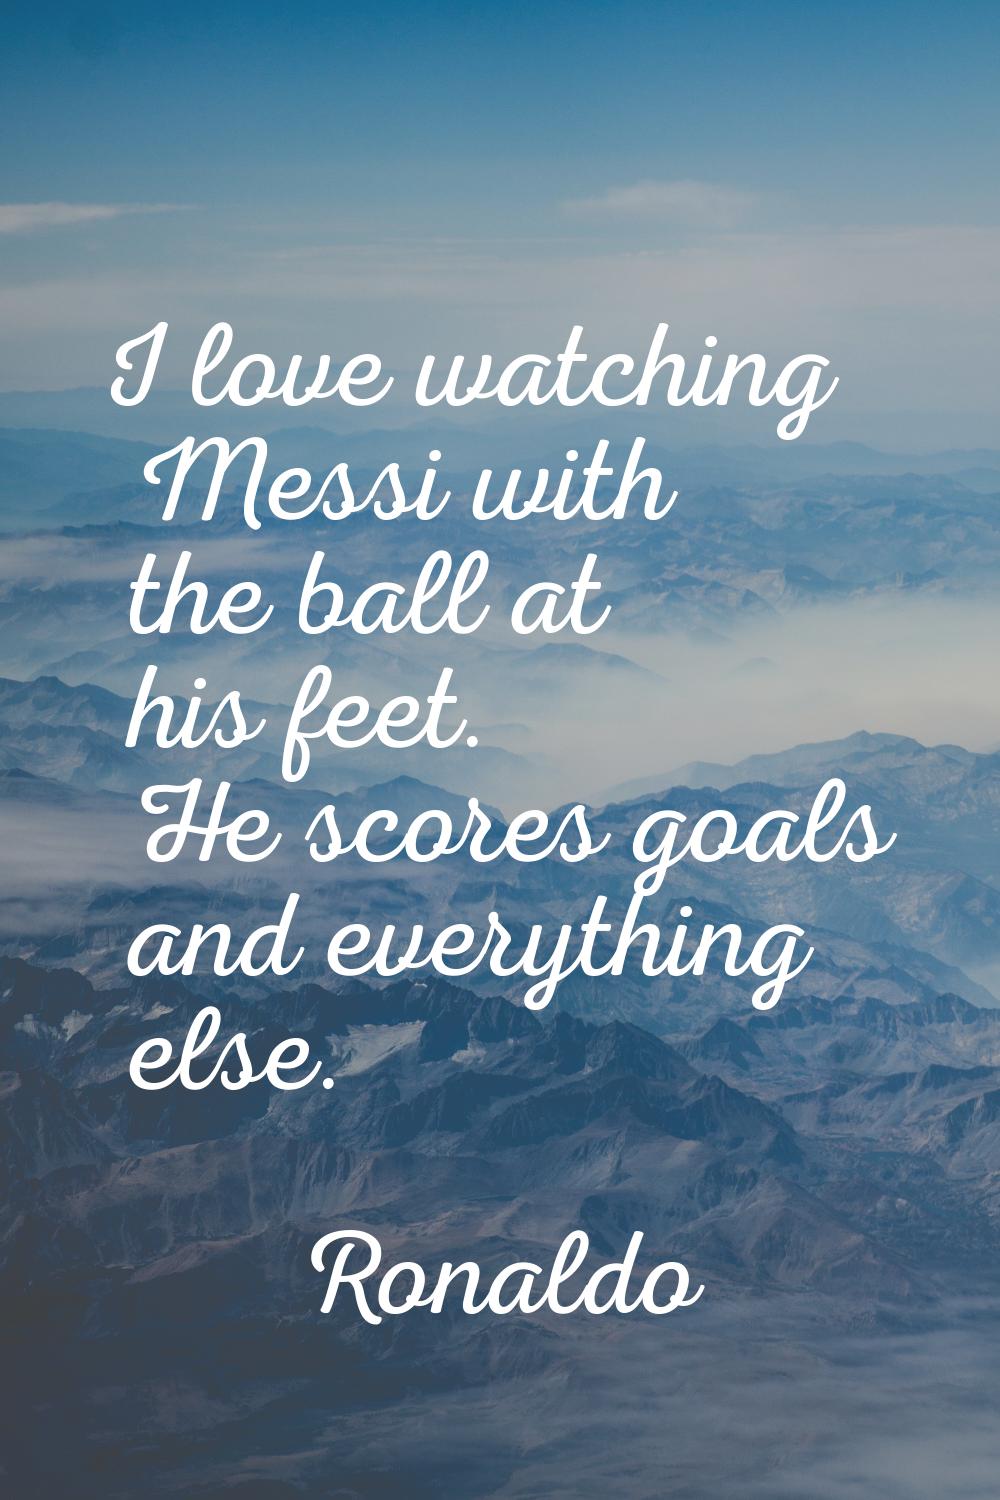 I love watching Messi with the ball at his feet. He scores goals and everything else.